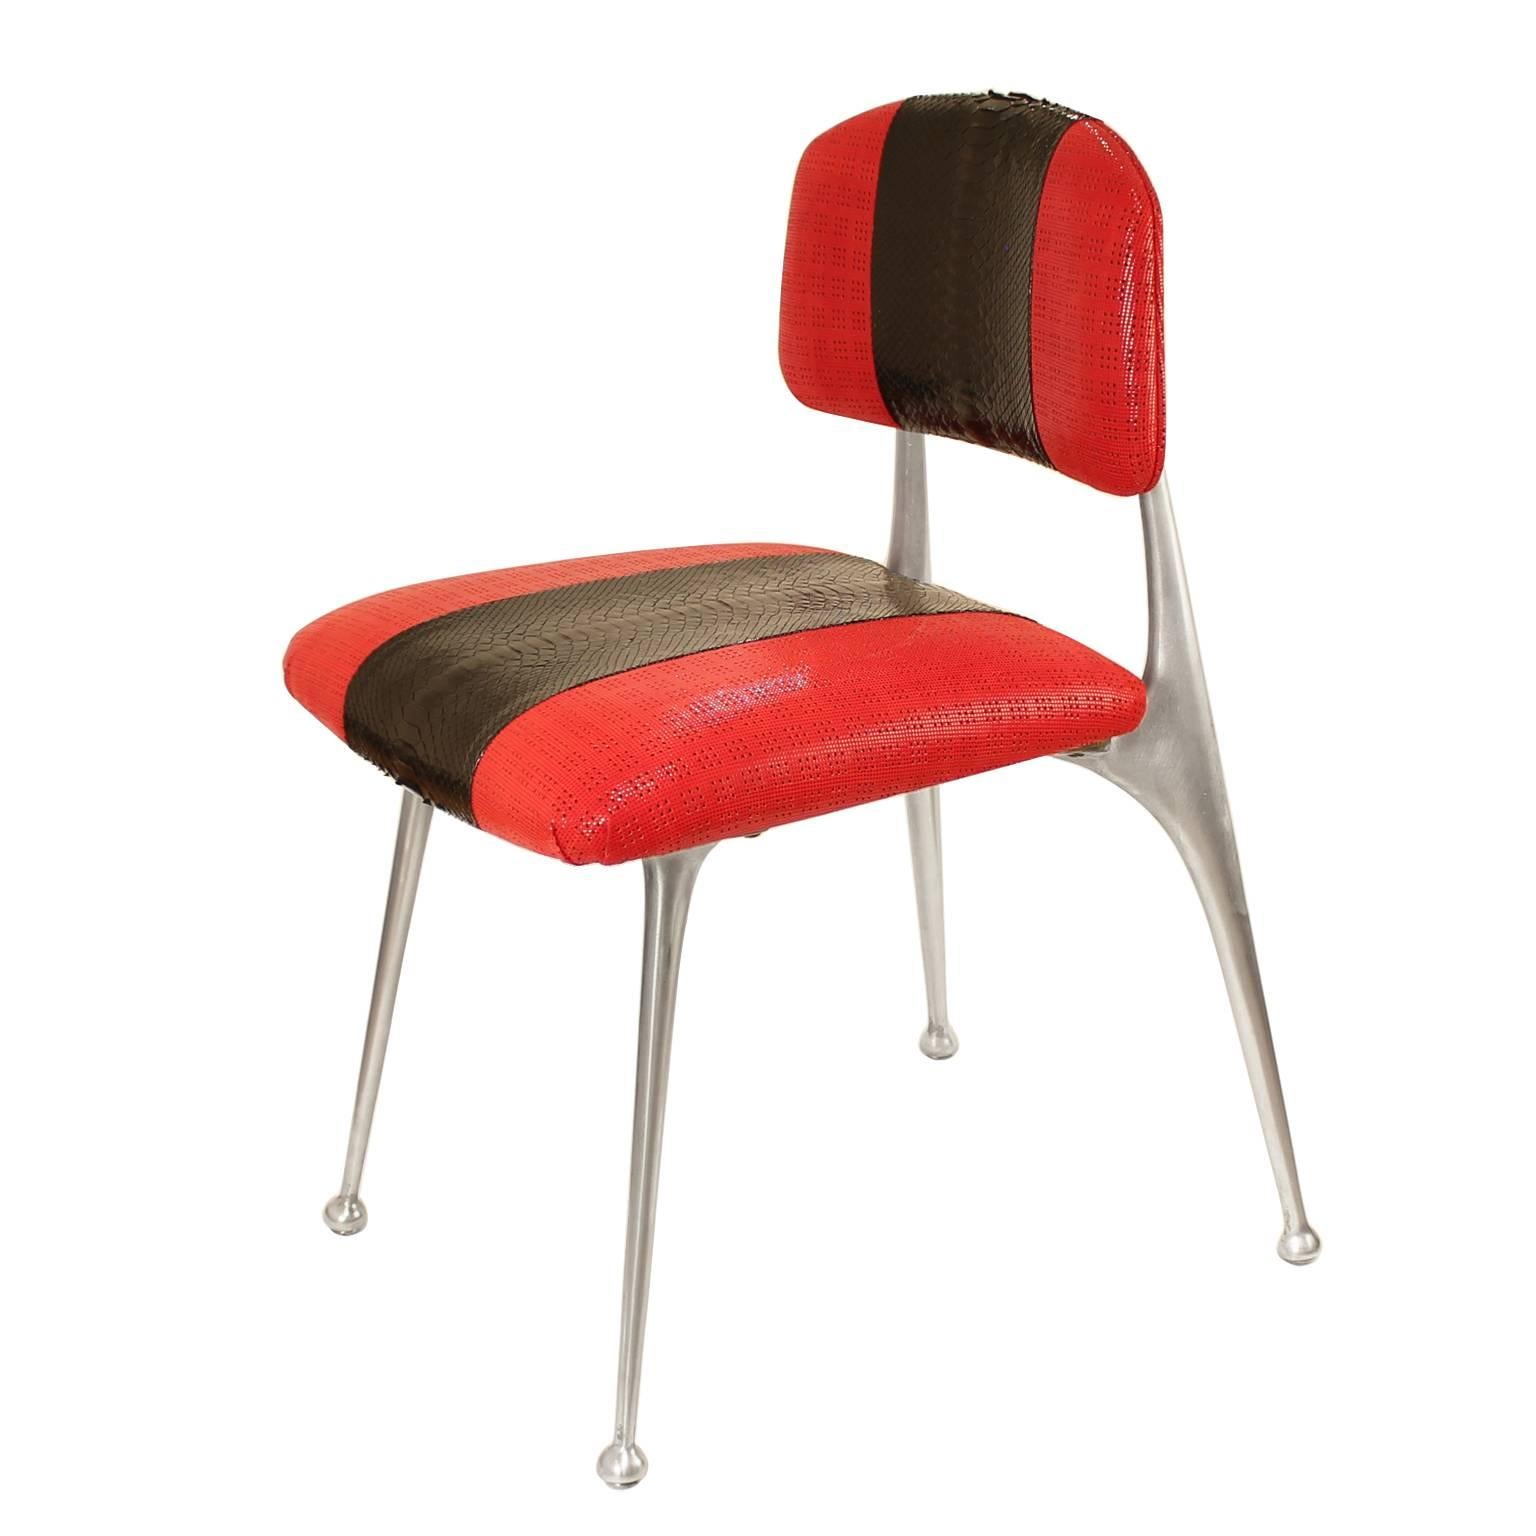 Outstanding Vintage Cast Aluminum Mid-Century Chair With Python Racing Stripe For Sale